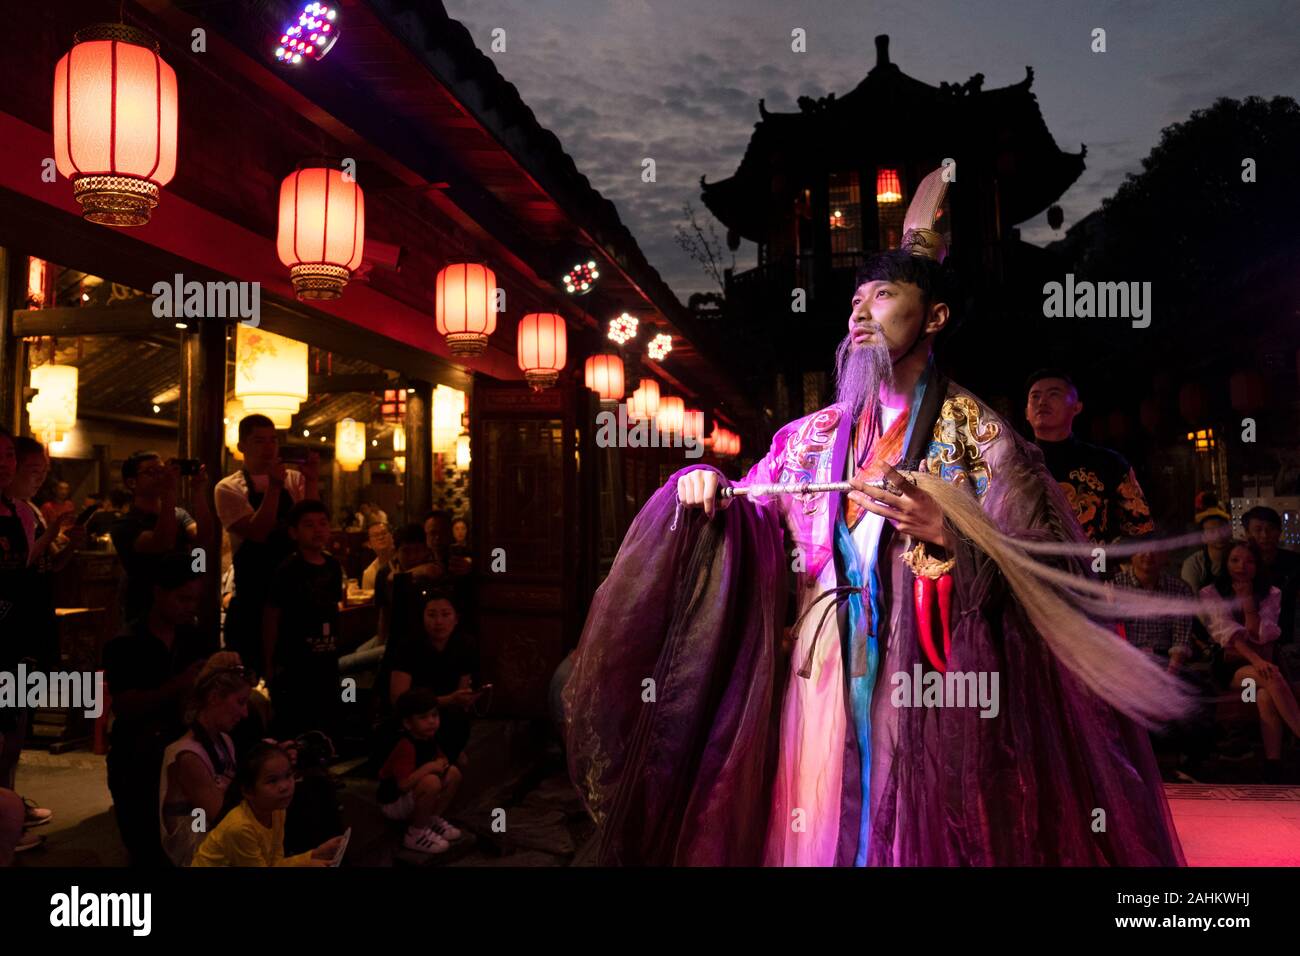 A Chinese performer at The Way of The Dragon restaurant in Chengdu, China Stock Photo